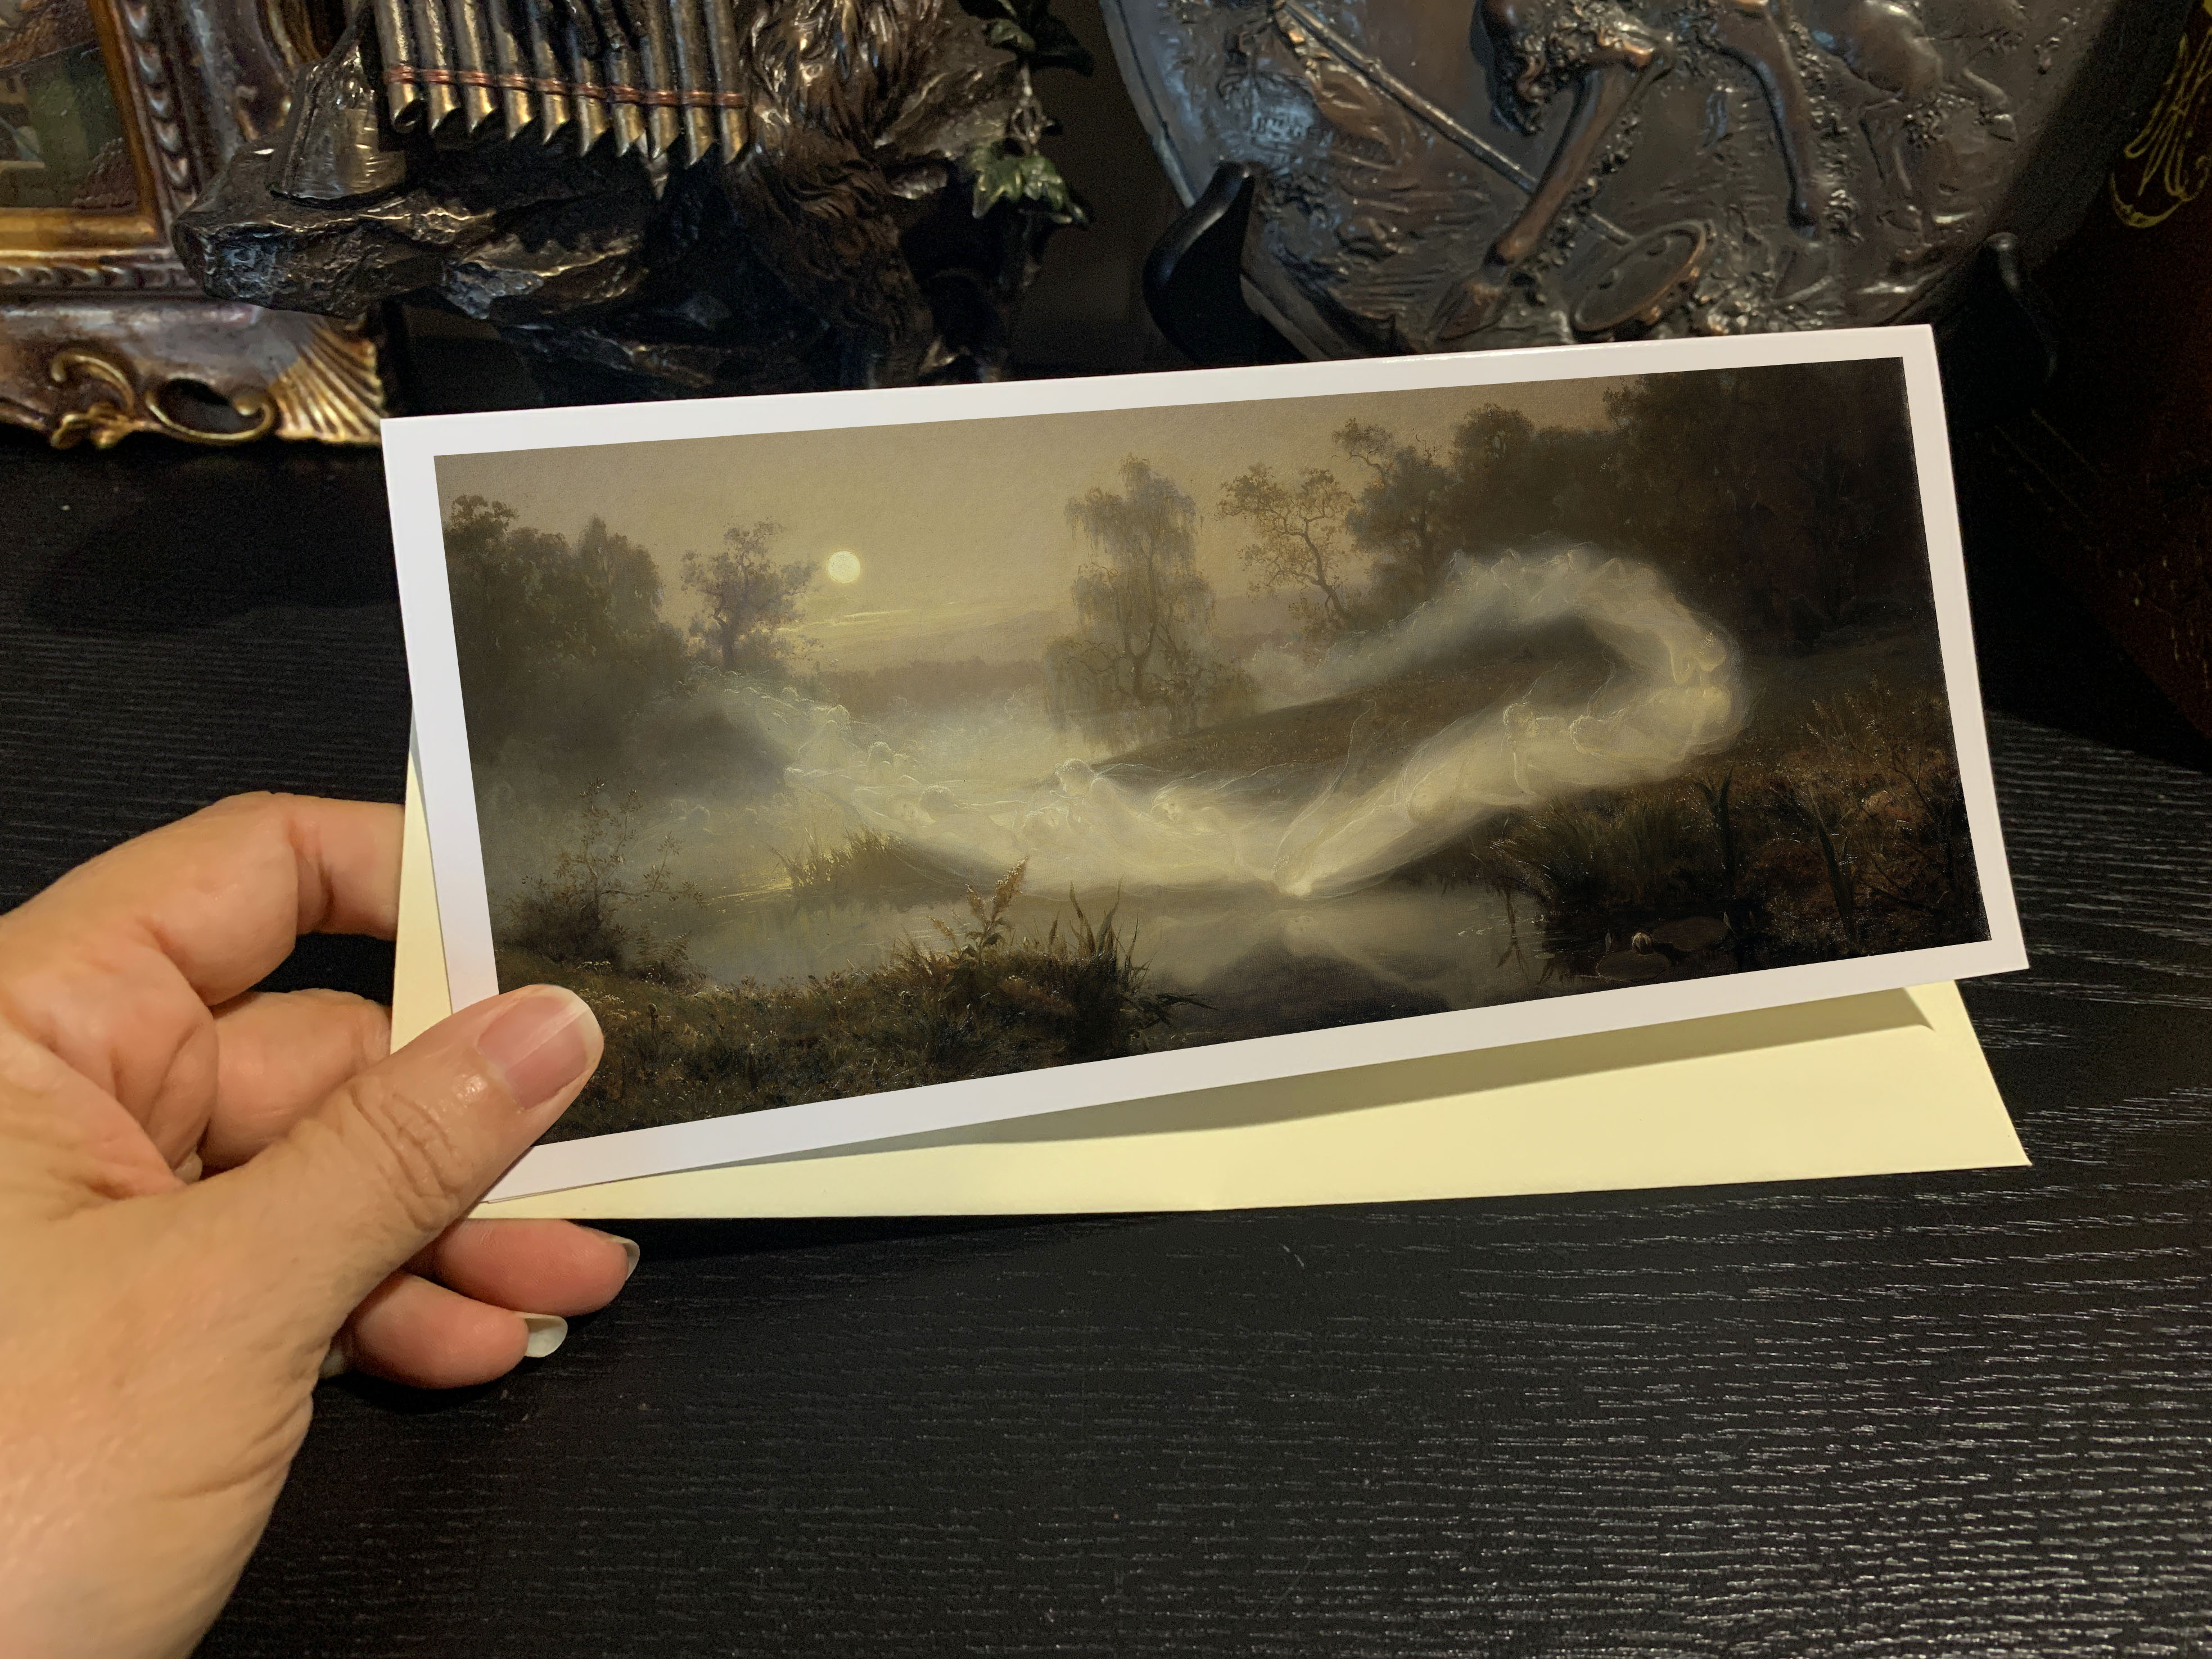 Dancing Fairies by August Malmström, Panoramic Greeting Card/Money Holder with Ivory Envelope